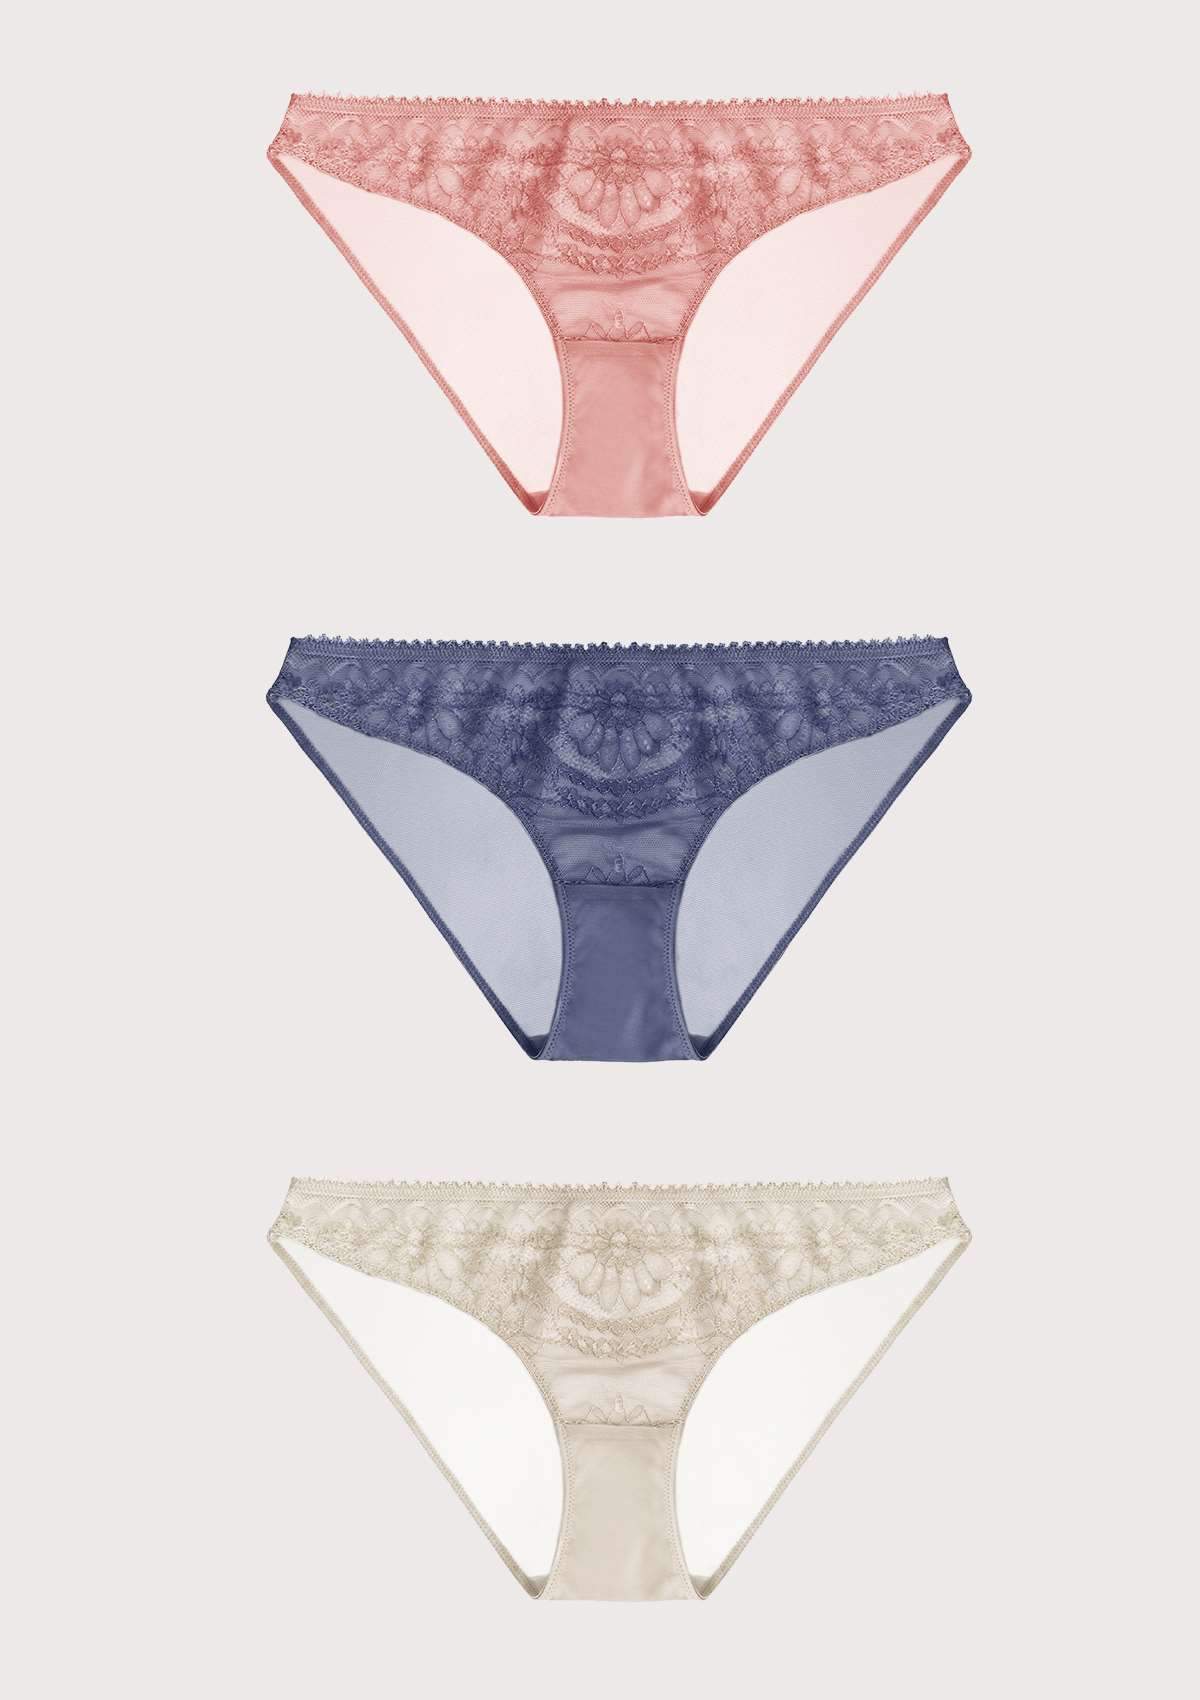 HSIA Beautifully-designed Breathable Bikini Panties 3 Pack - S / Pink+Blue+Linen